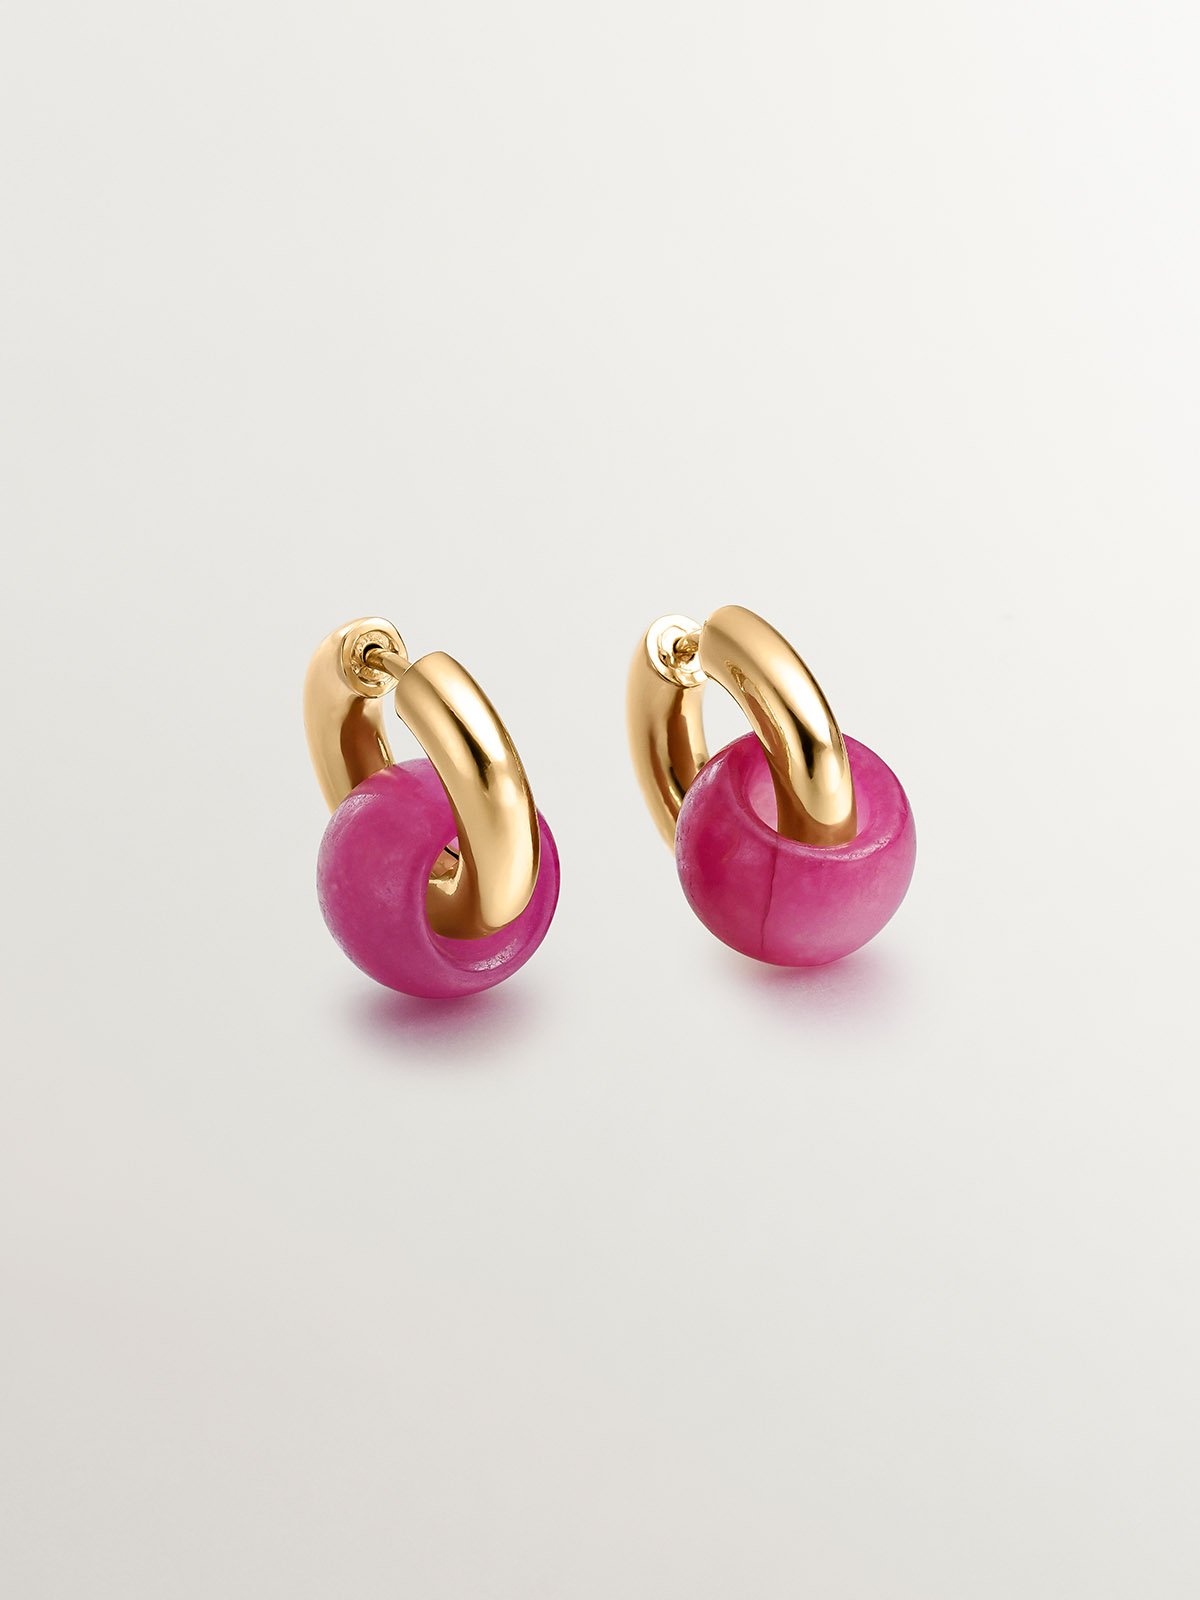 925 silver earrings bathed in 18k yellow gold with red jade